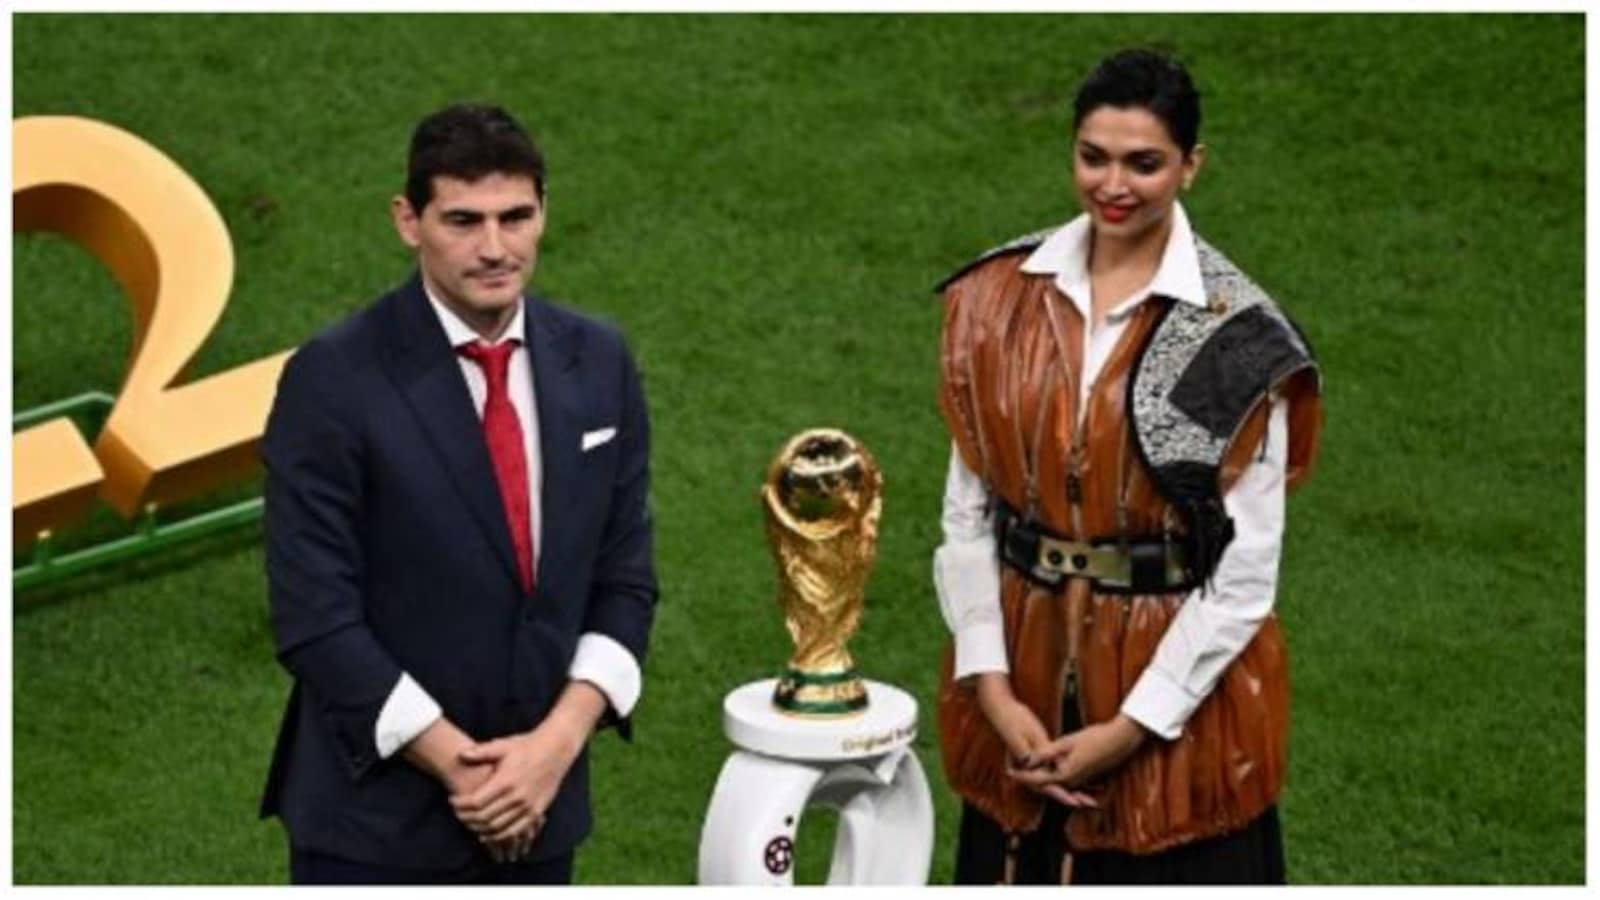 Louis Vuitton - Victory Travels in Louis Vuitton. Deepika Padukone and Iker  Casillas presented the ultimate prize in football in a bespoke Louis  Vuitton trophy trunk at the FIFA World Cup 2022™